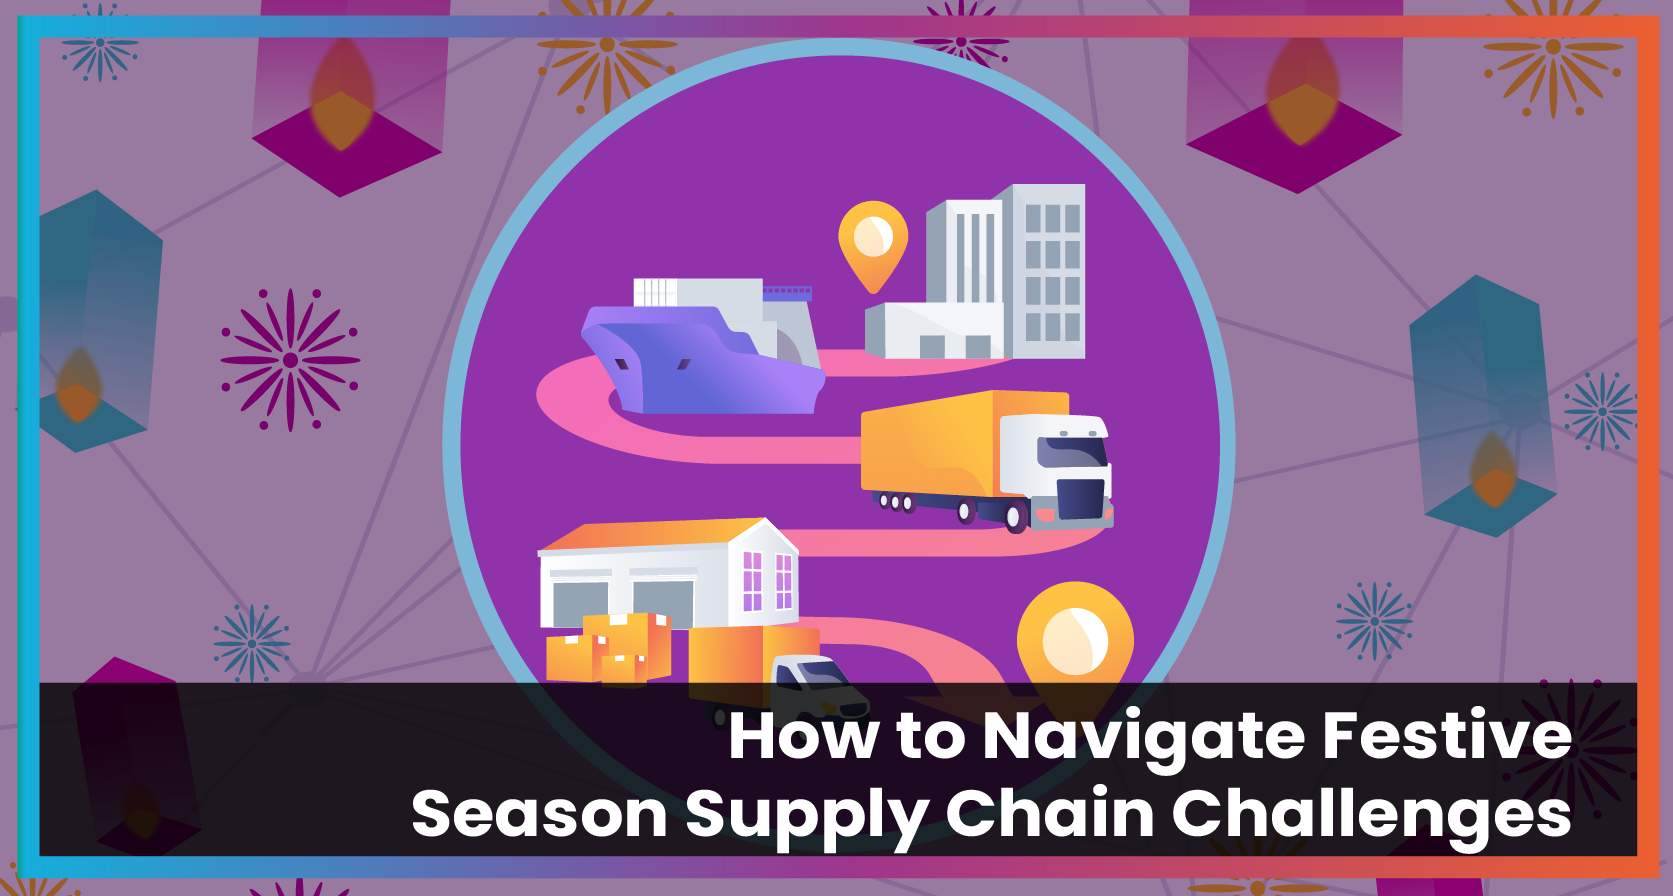 How to Navigate Festive Season Supply Chain Challenges